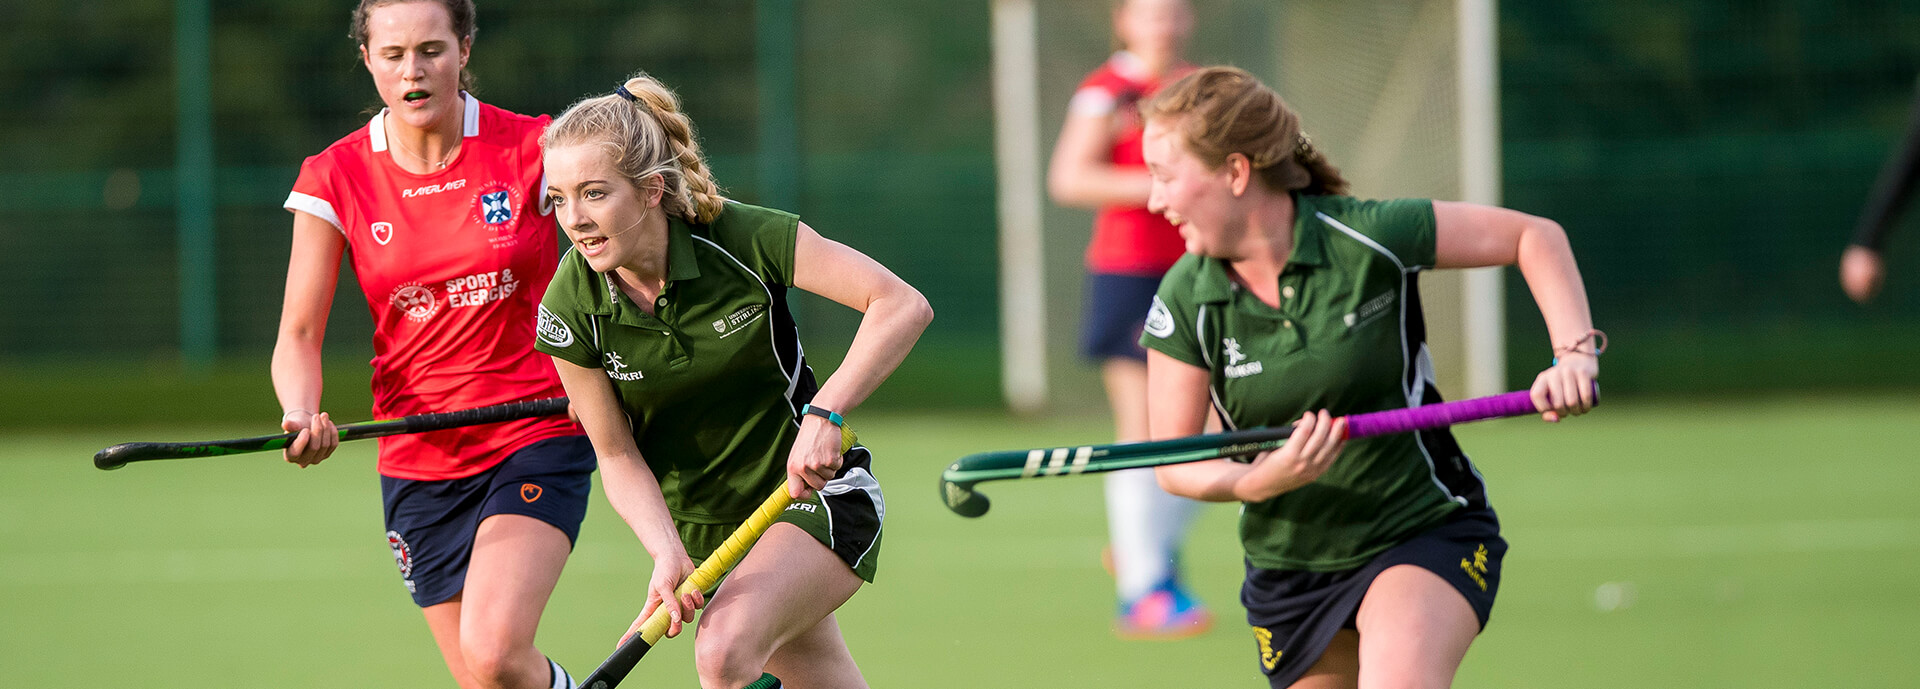 An image of female students playing hockey